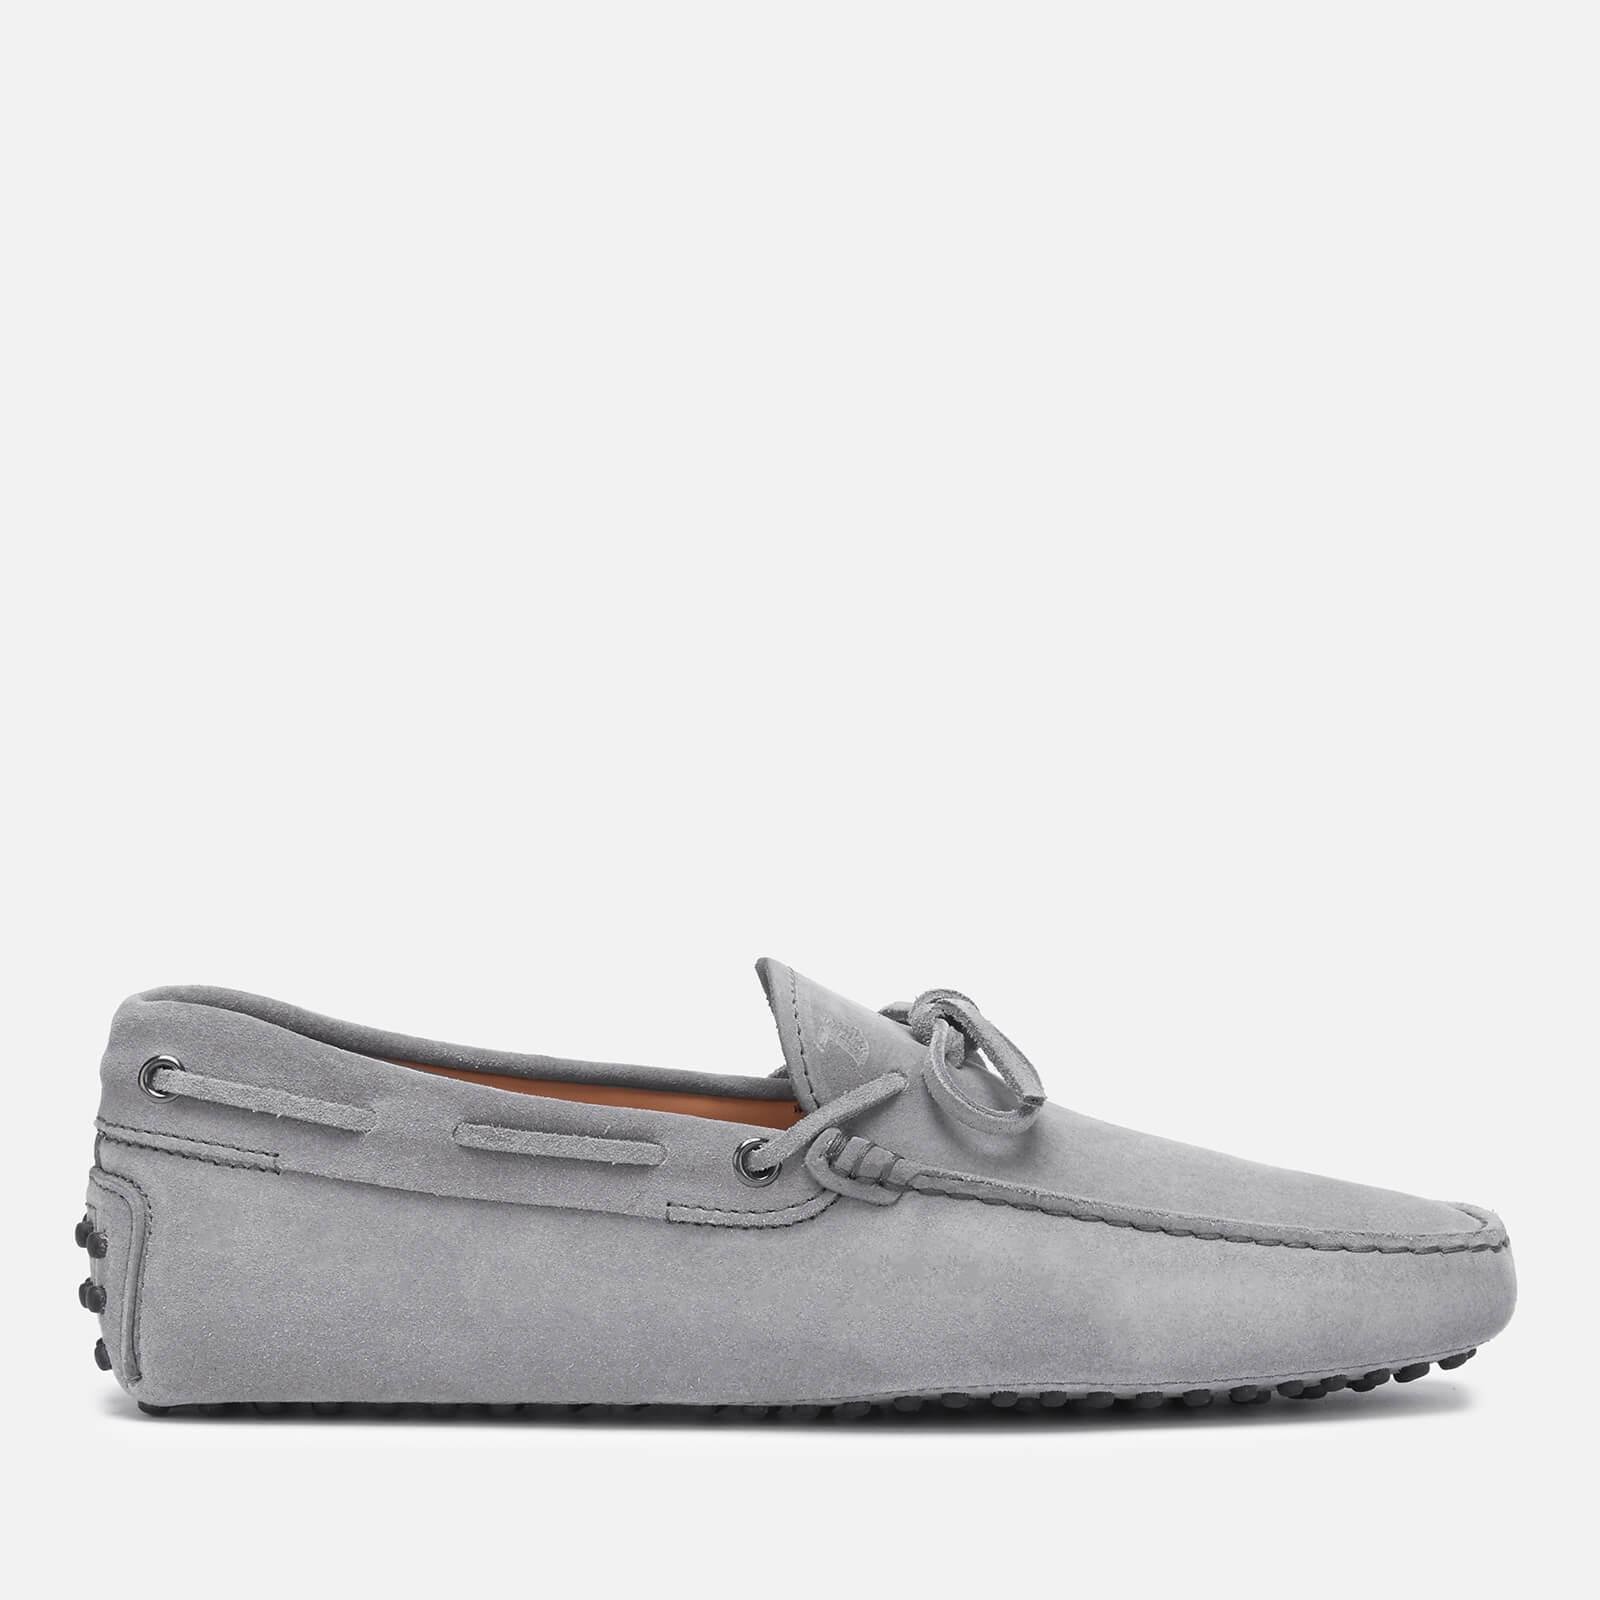 Tod's Suede Lace Tie Gommini Driving Shoes in Grey (Gray) for Men - Lyst